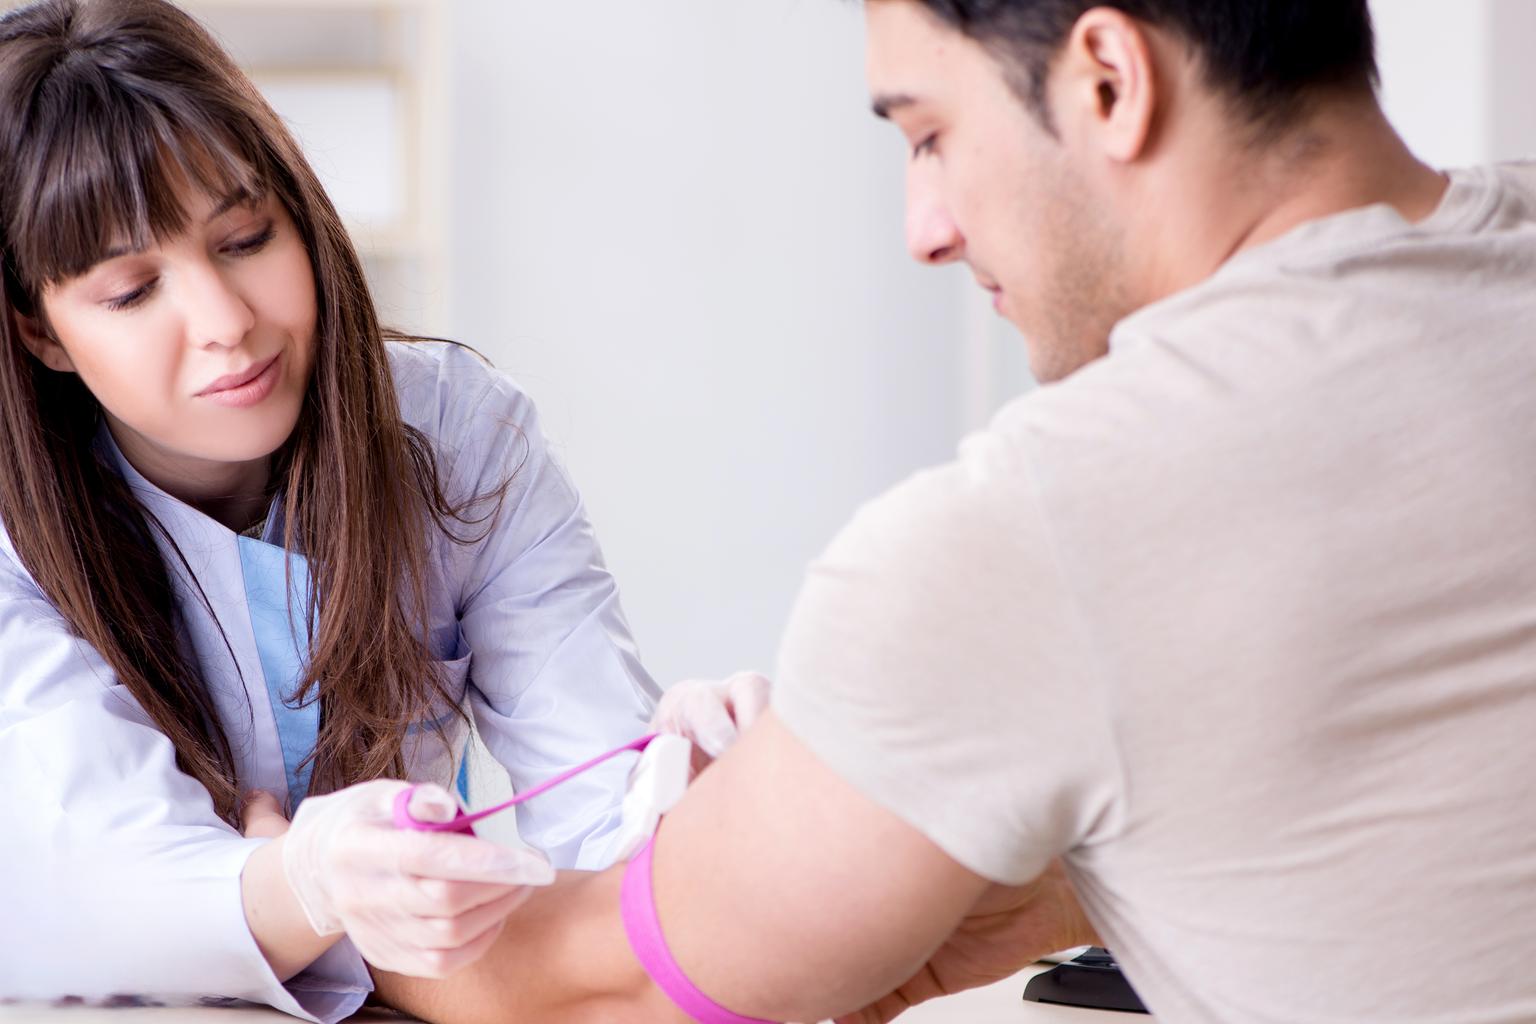 Female medical professional taking a blood sample from male patient for analysis